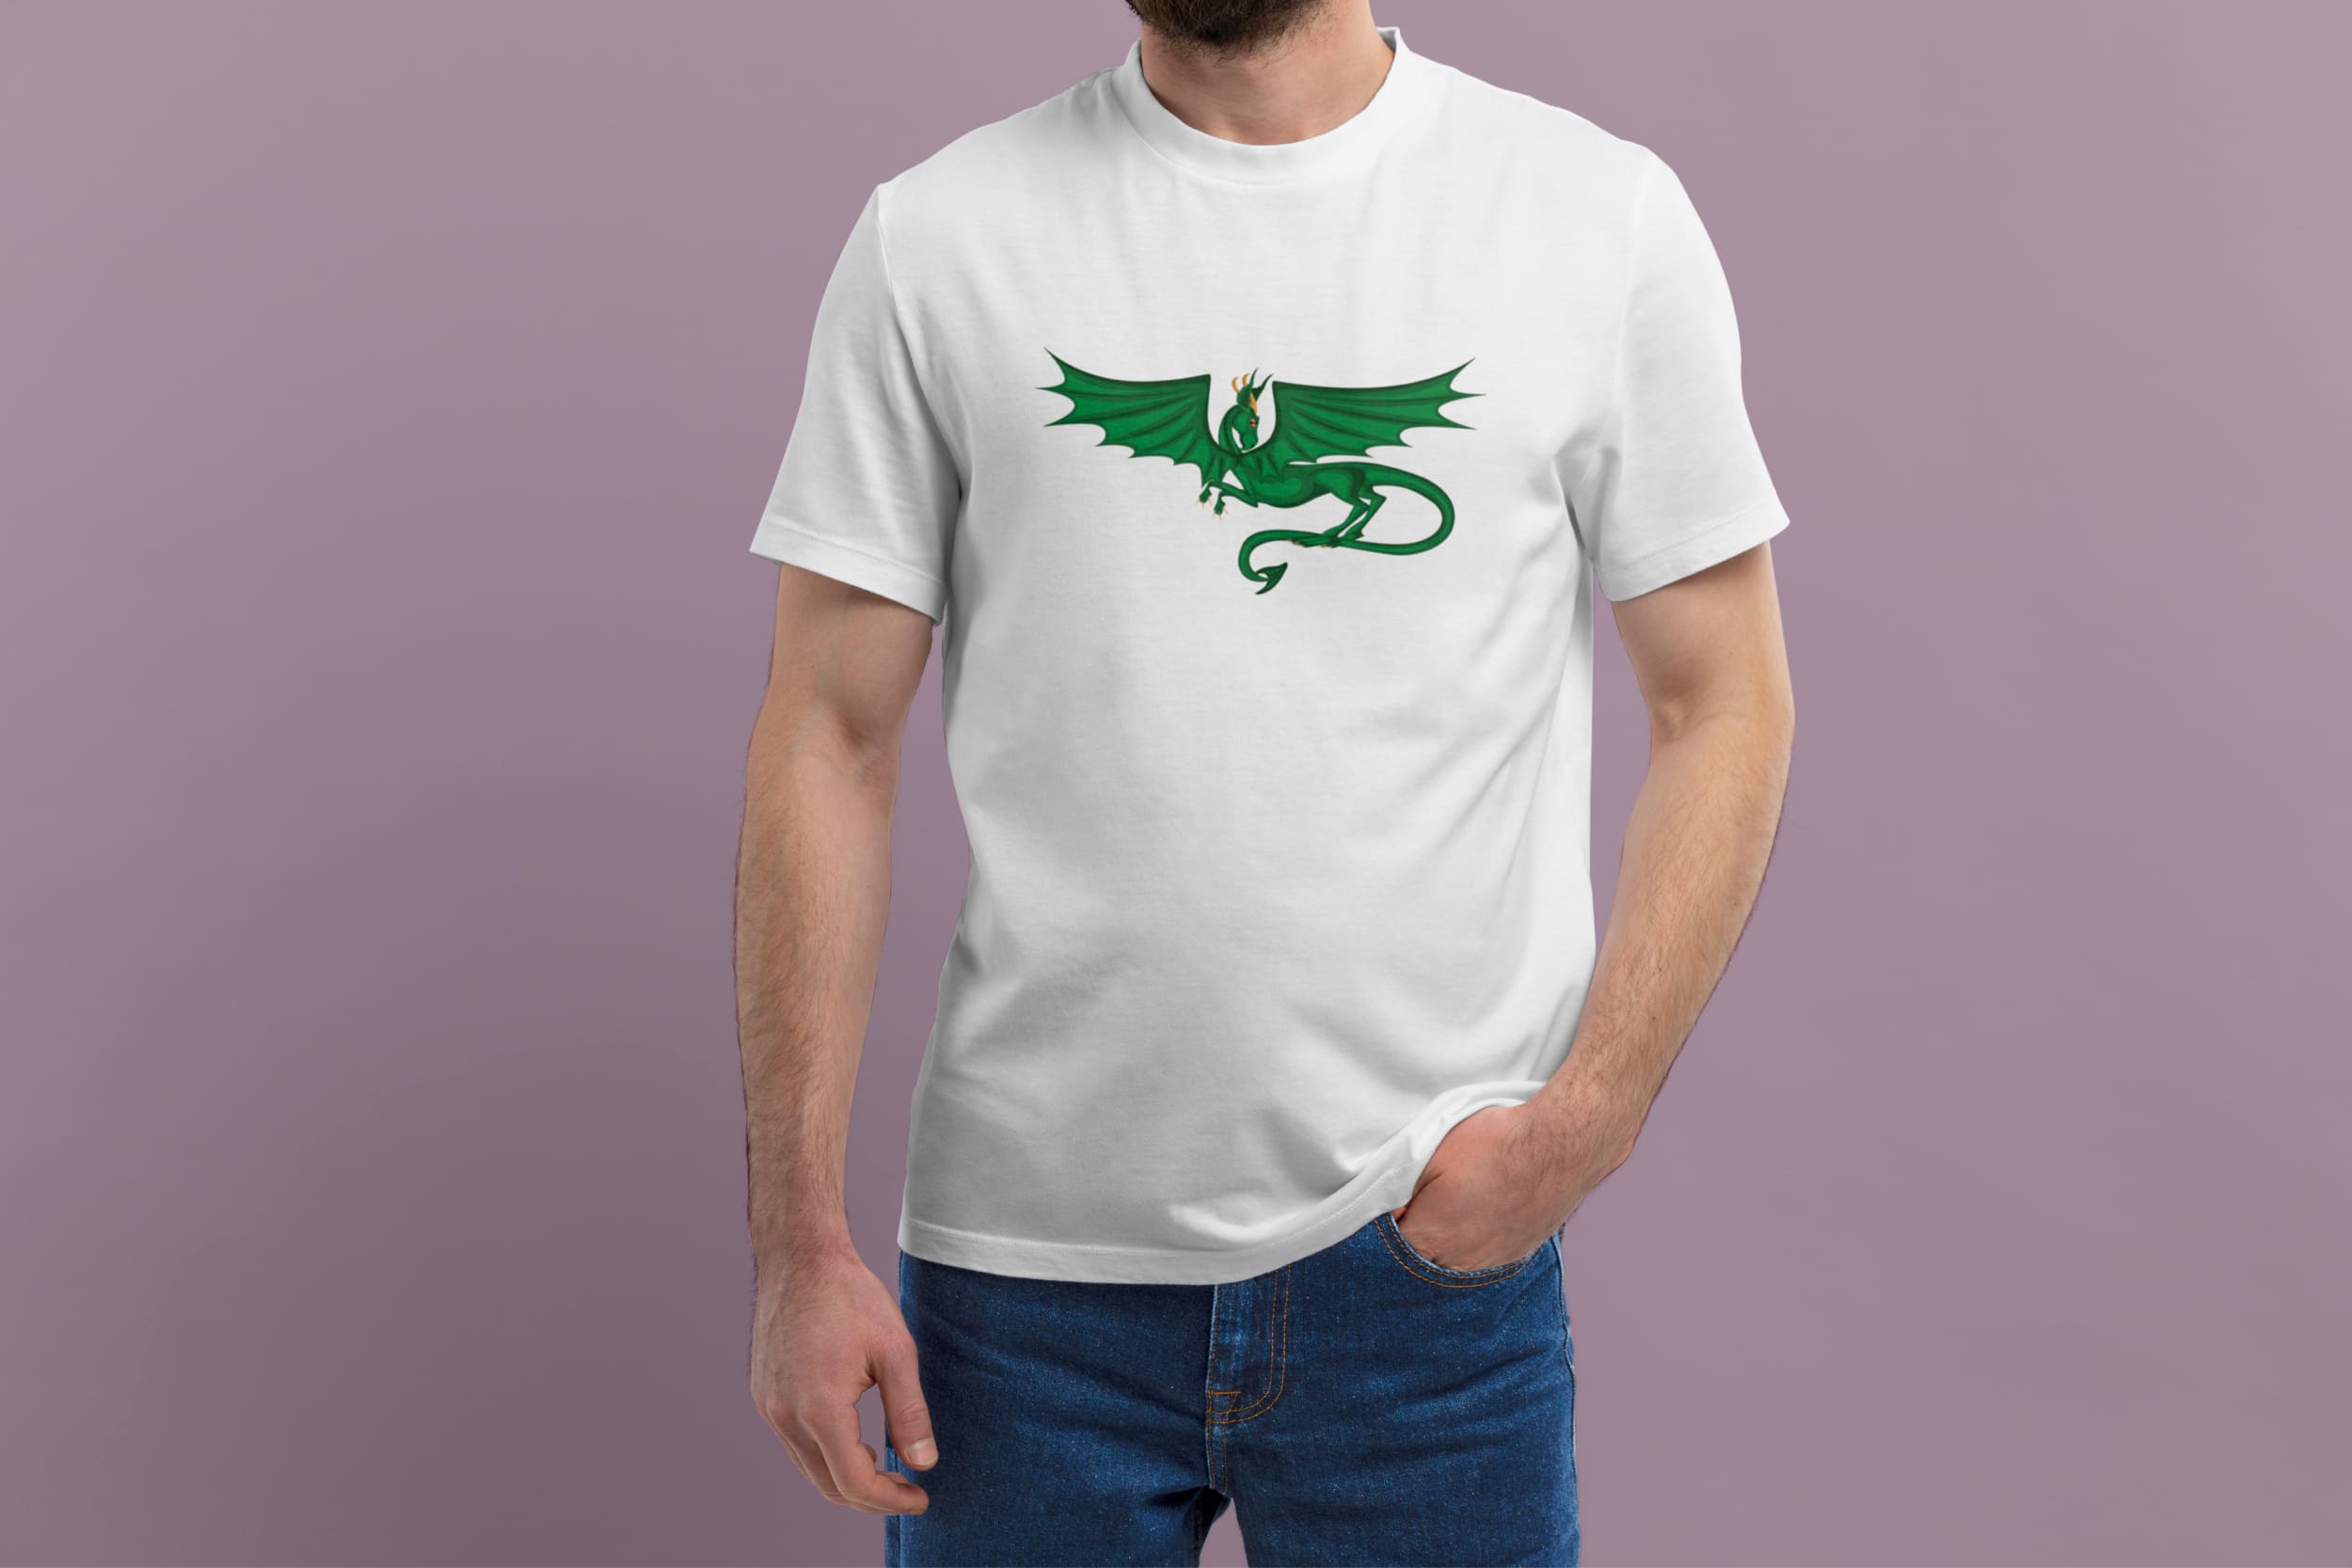 A white t-shirt with an image of a green dragon on a man.